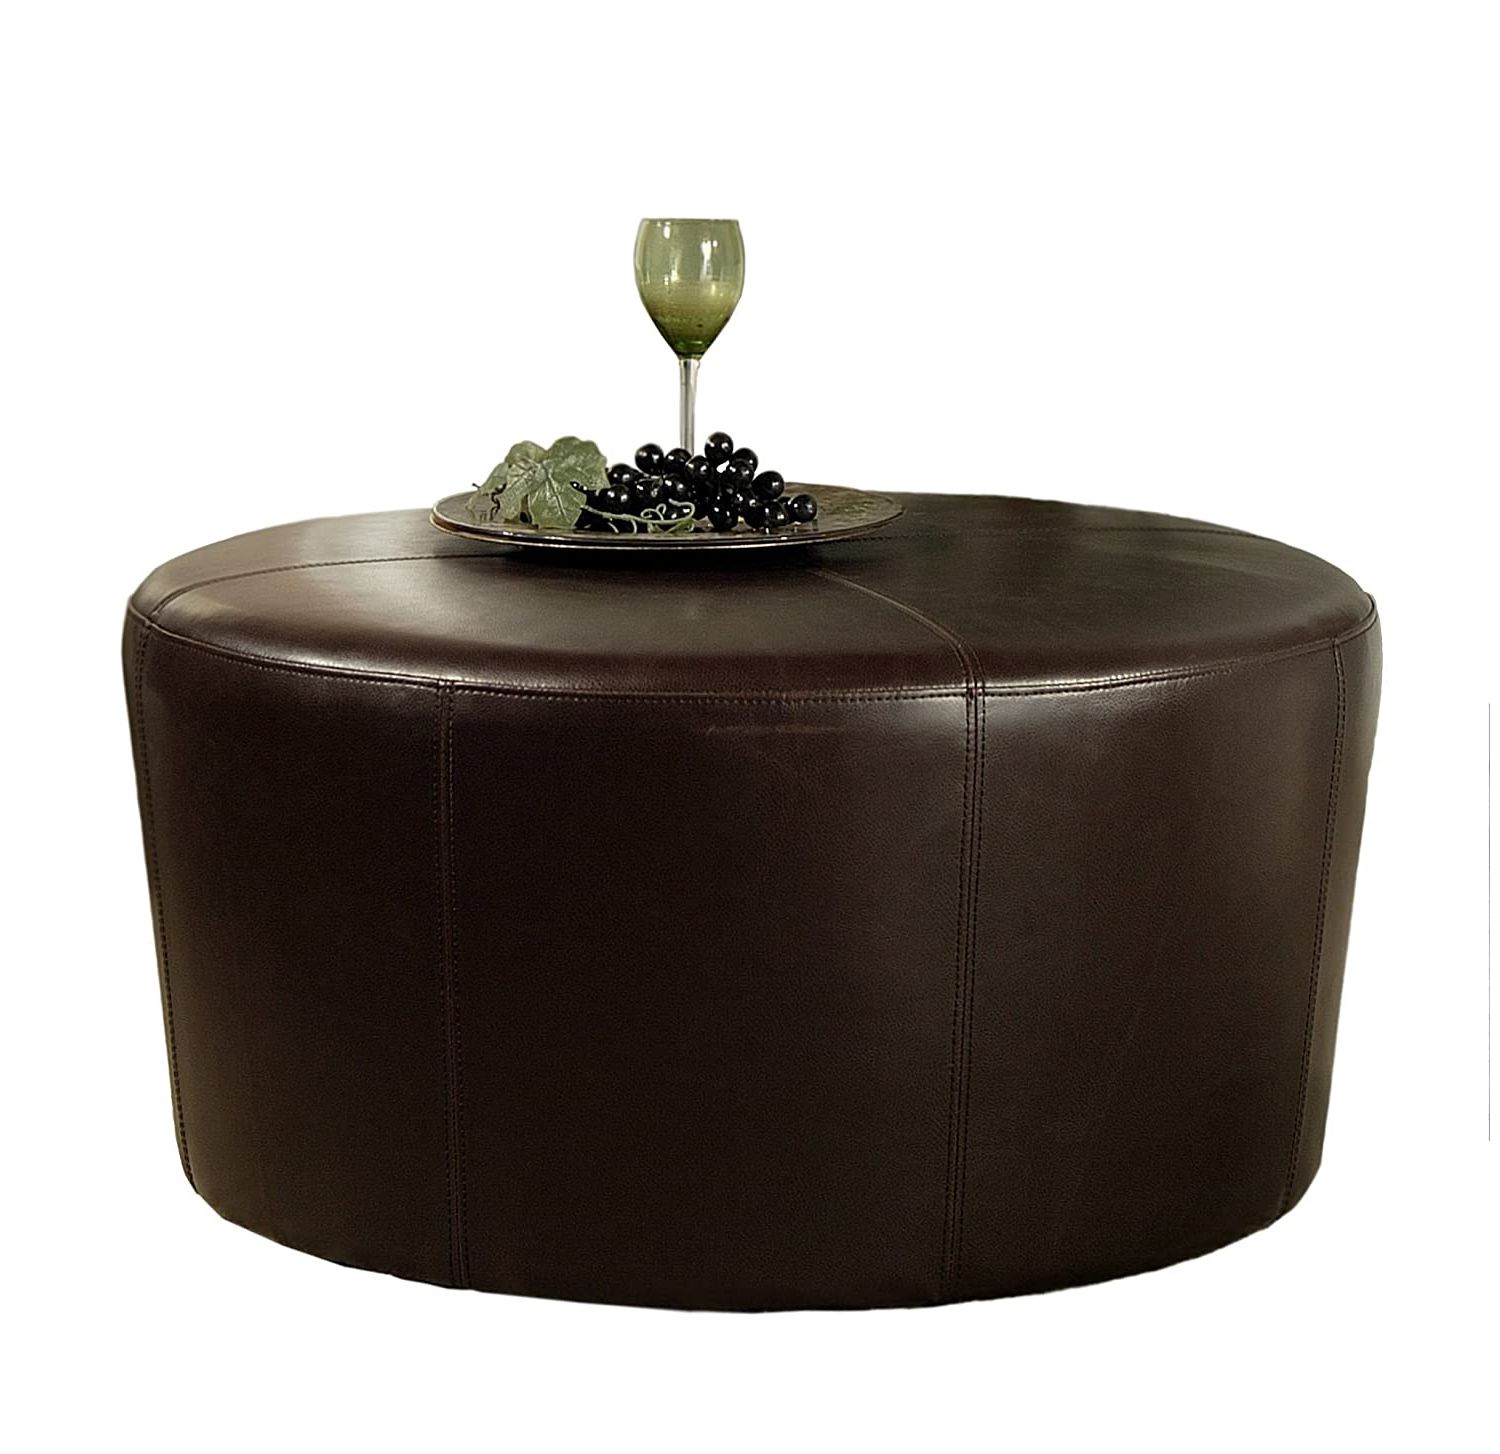 Popular Brown Leather Round Pouf Ottomans Inside Round Ottoman Coffee Table (View 2 of 10)